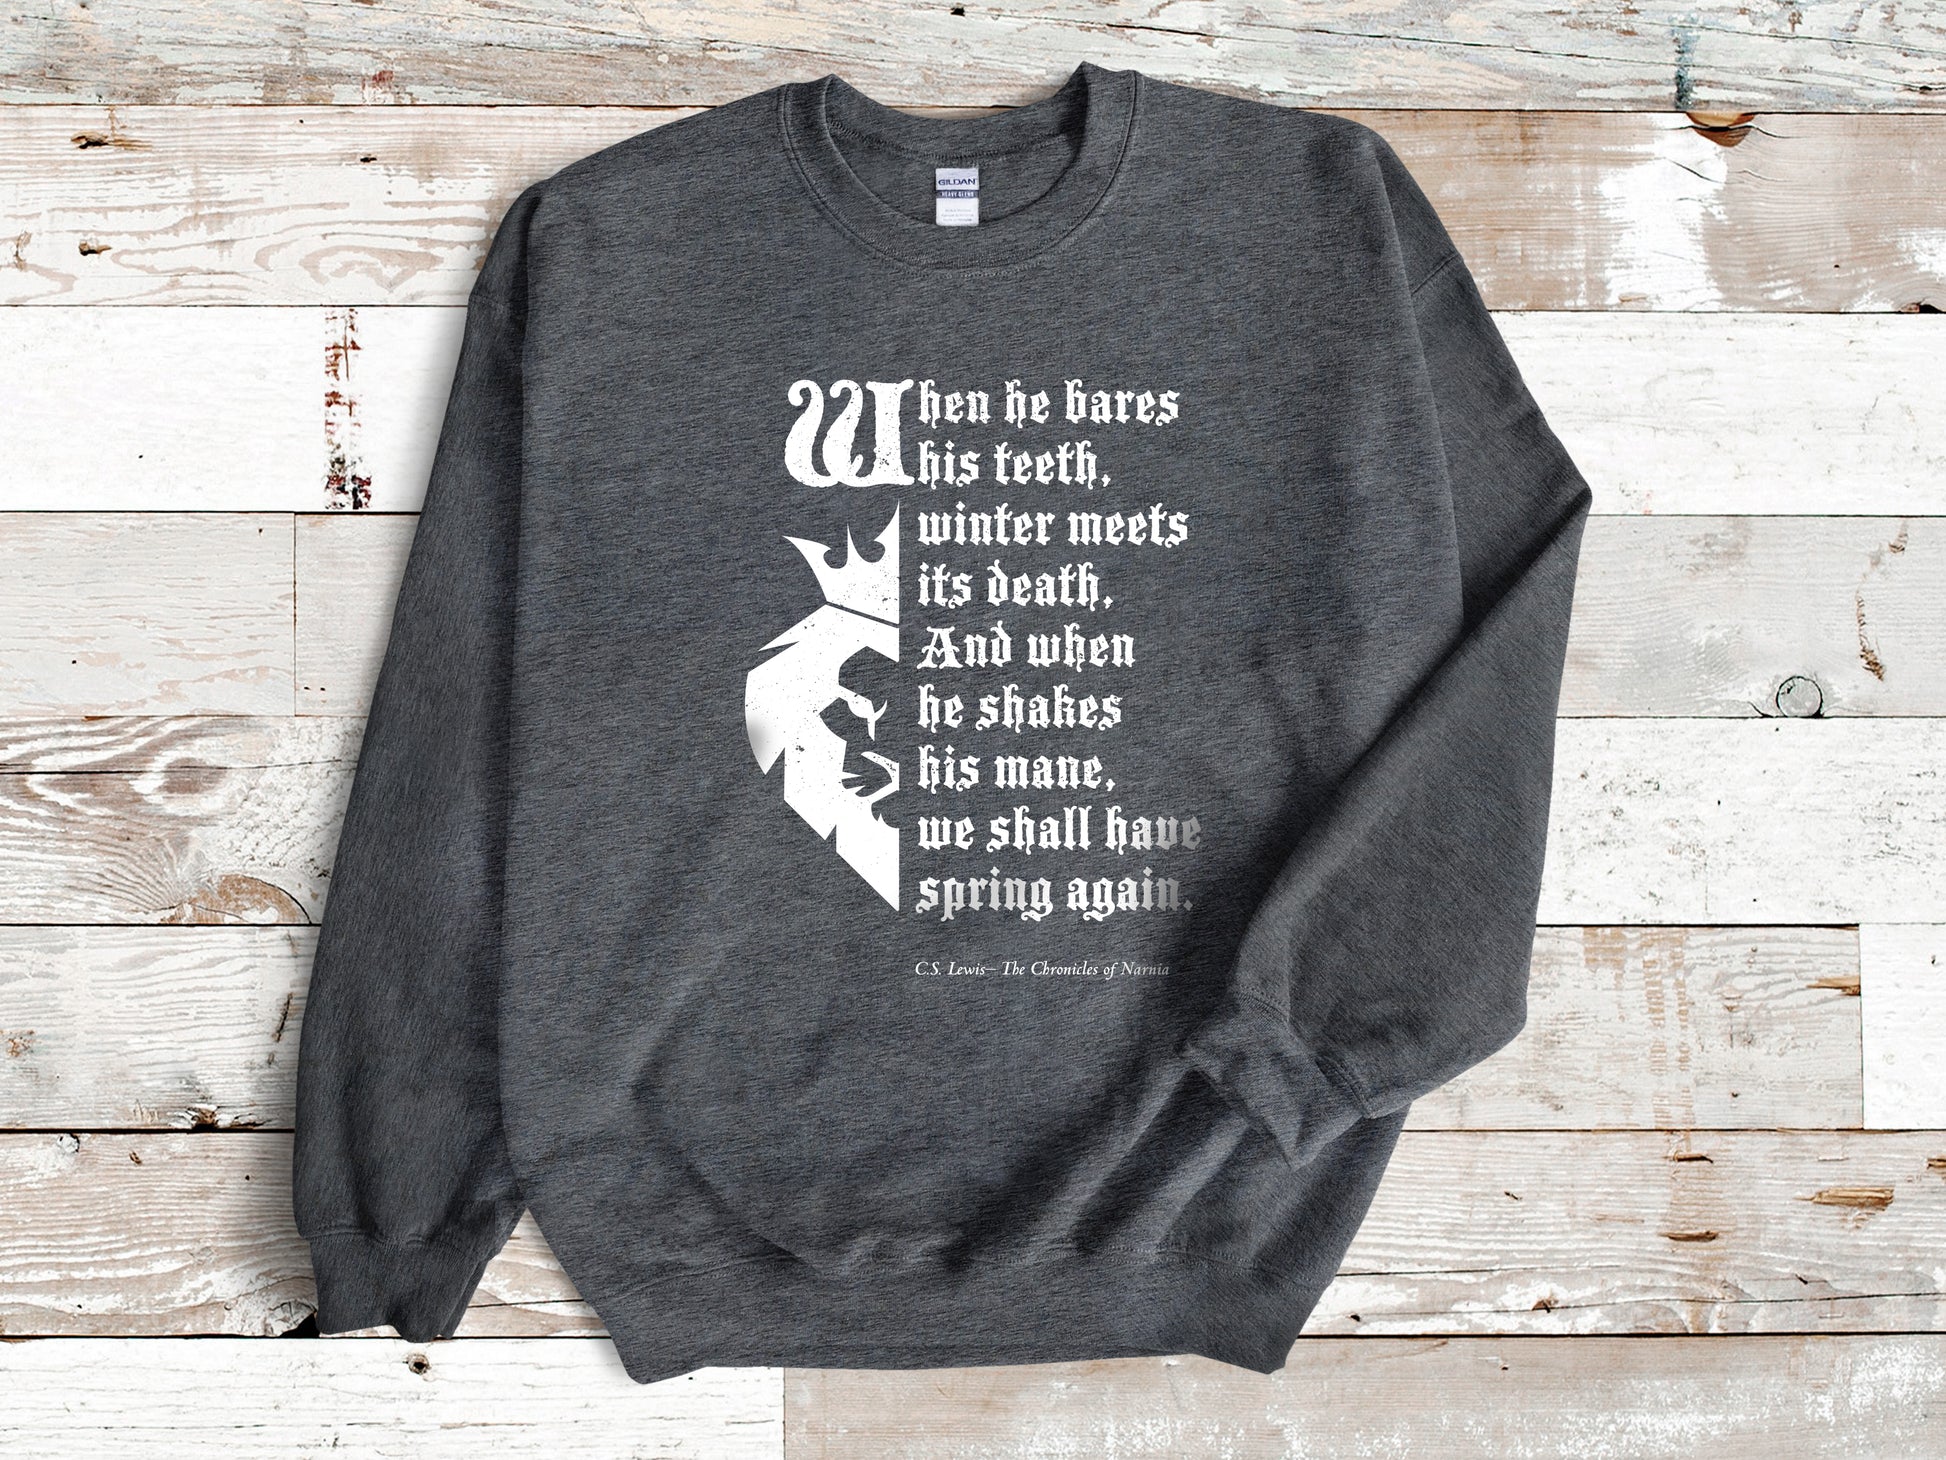 Narnia Quote Christian Pullover Sweatshirt for fans of Aslan-Sweatshirts-PureDesignTees